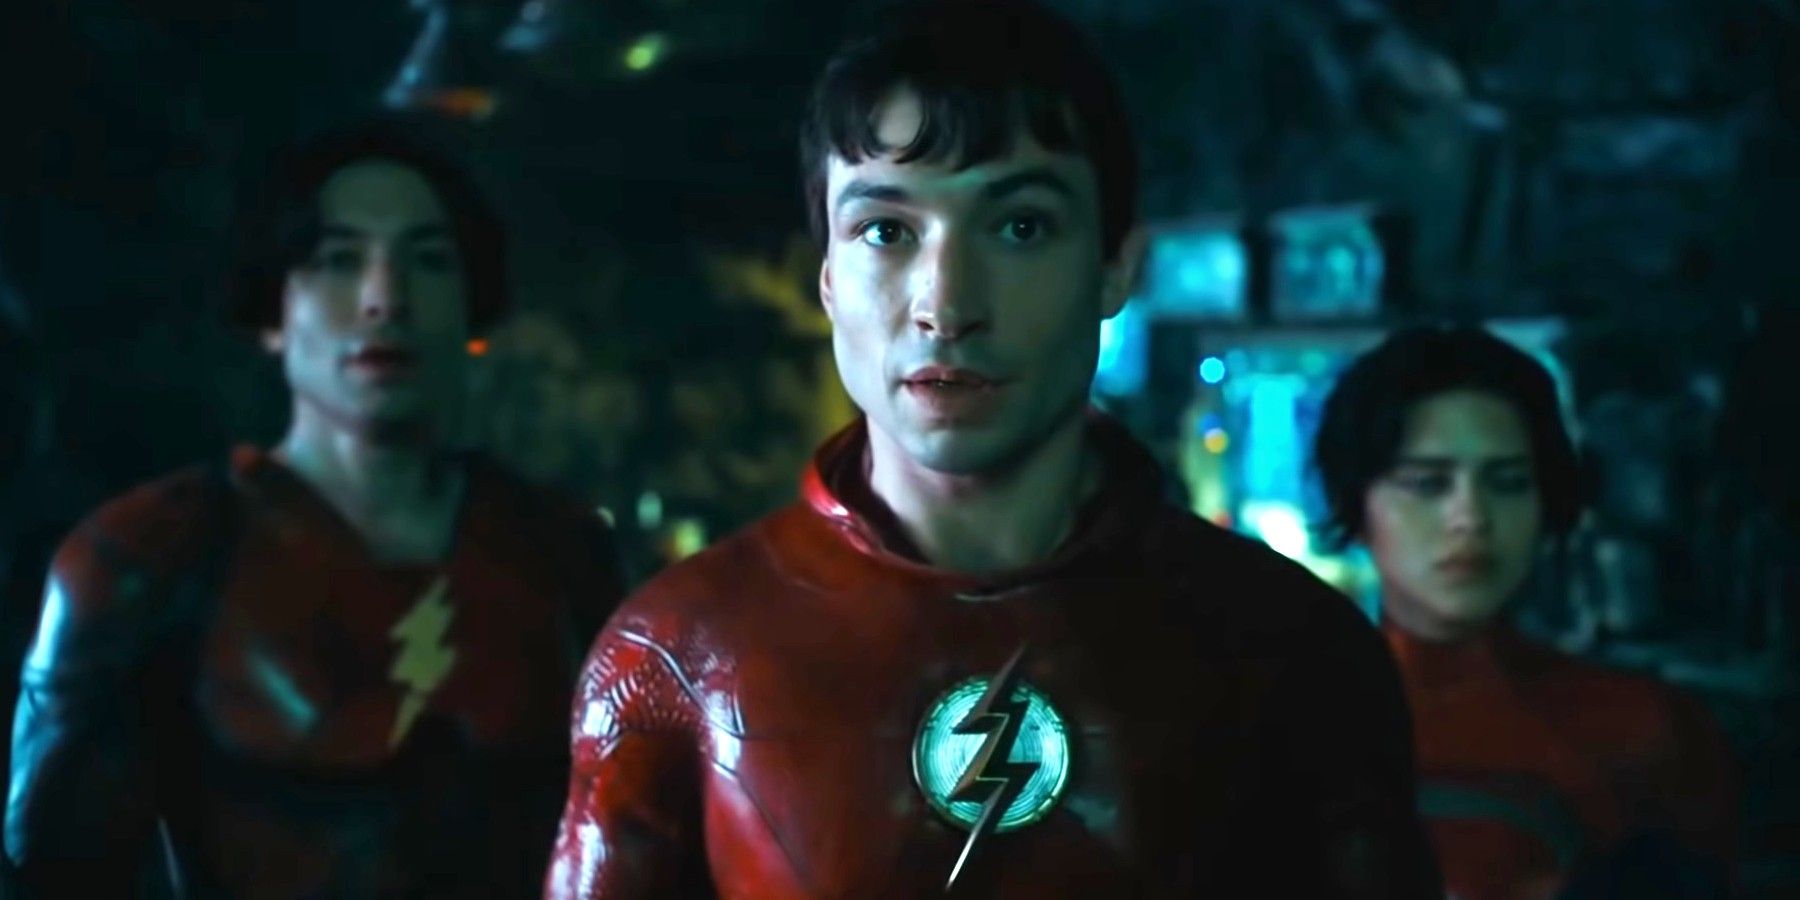 The Flash with his various variants